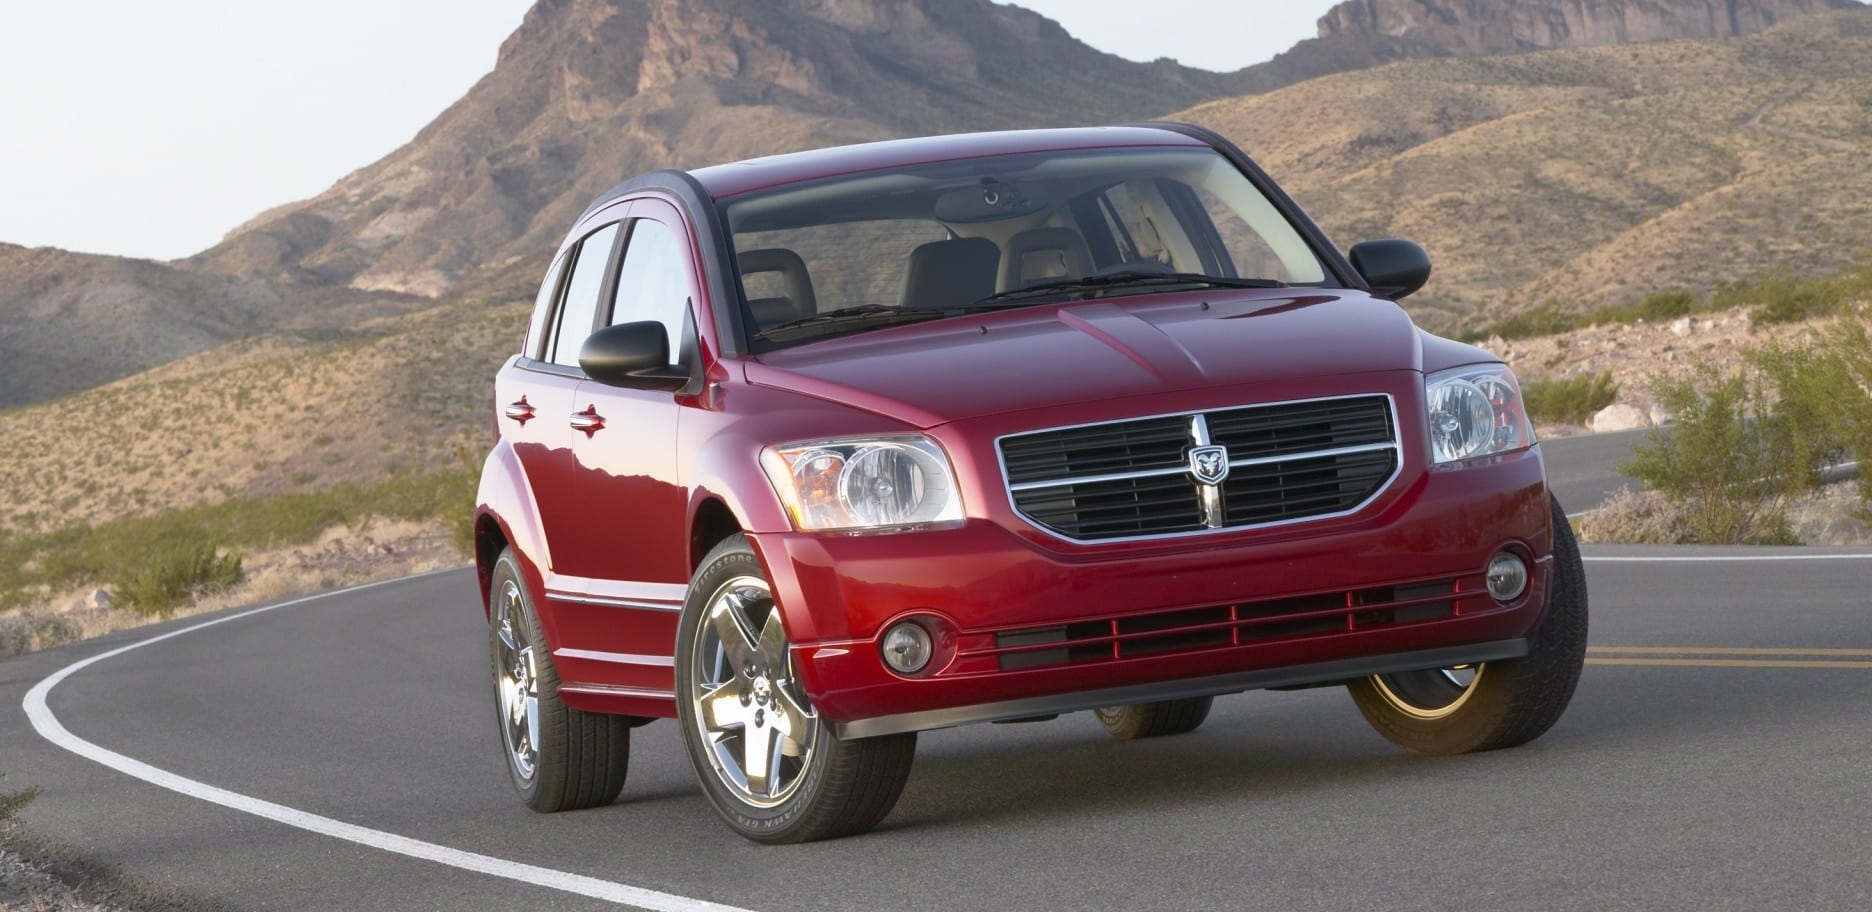 Buying a Used Dodge Caliber